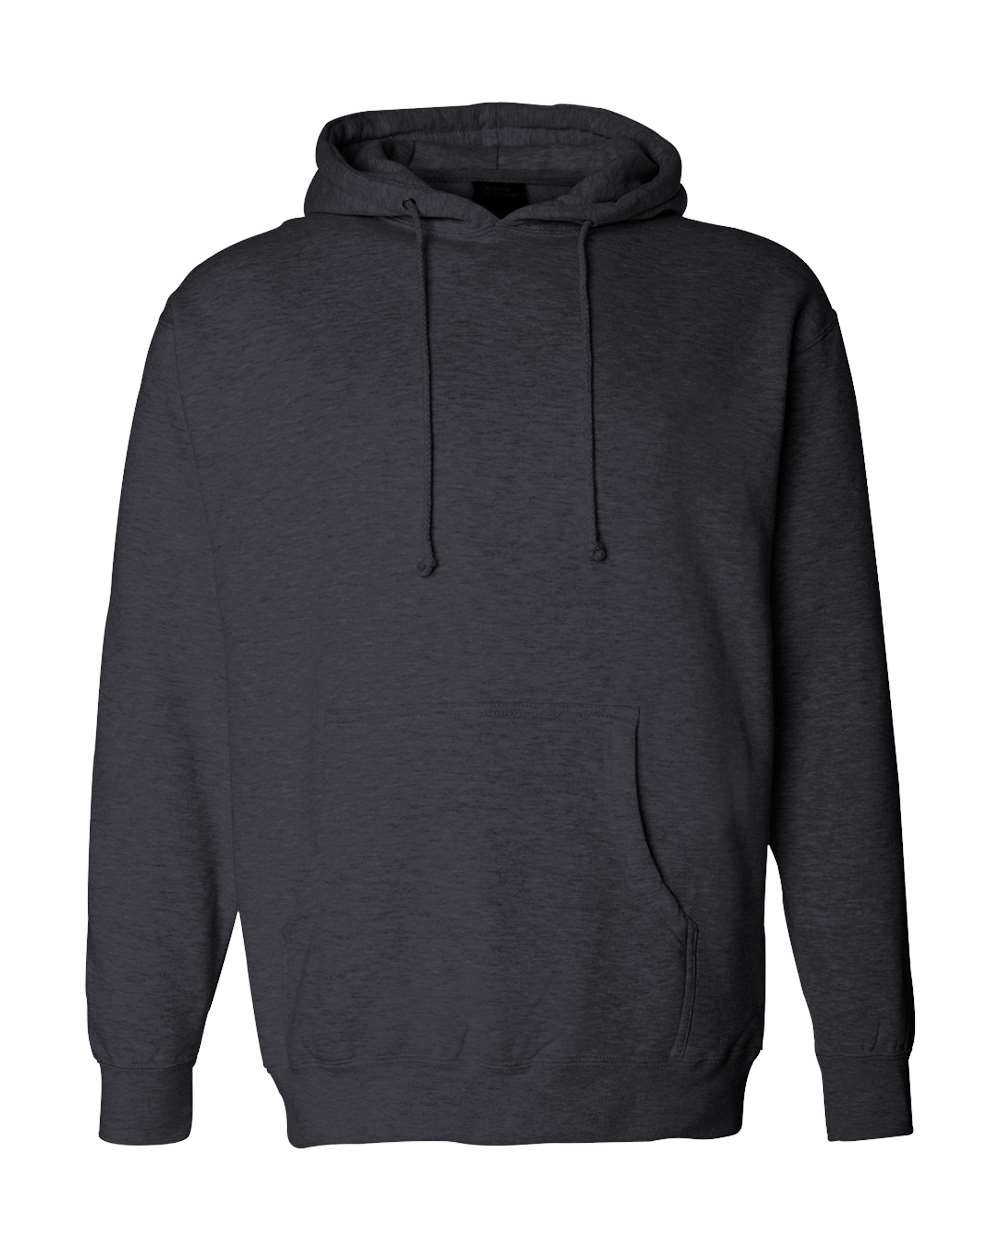 Independent Heavyweight Hoodie (IND4000) in Charcoal Heather